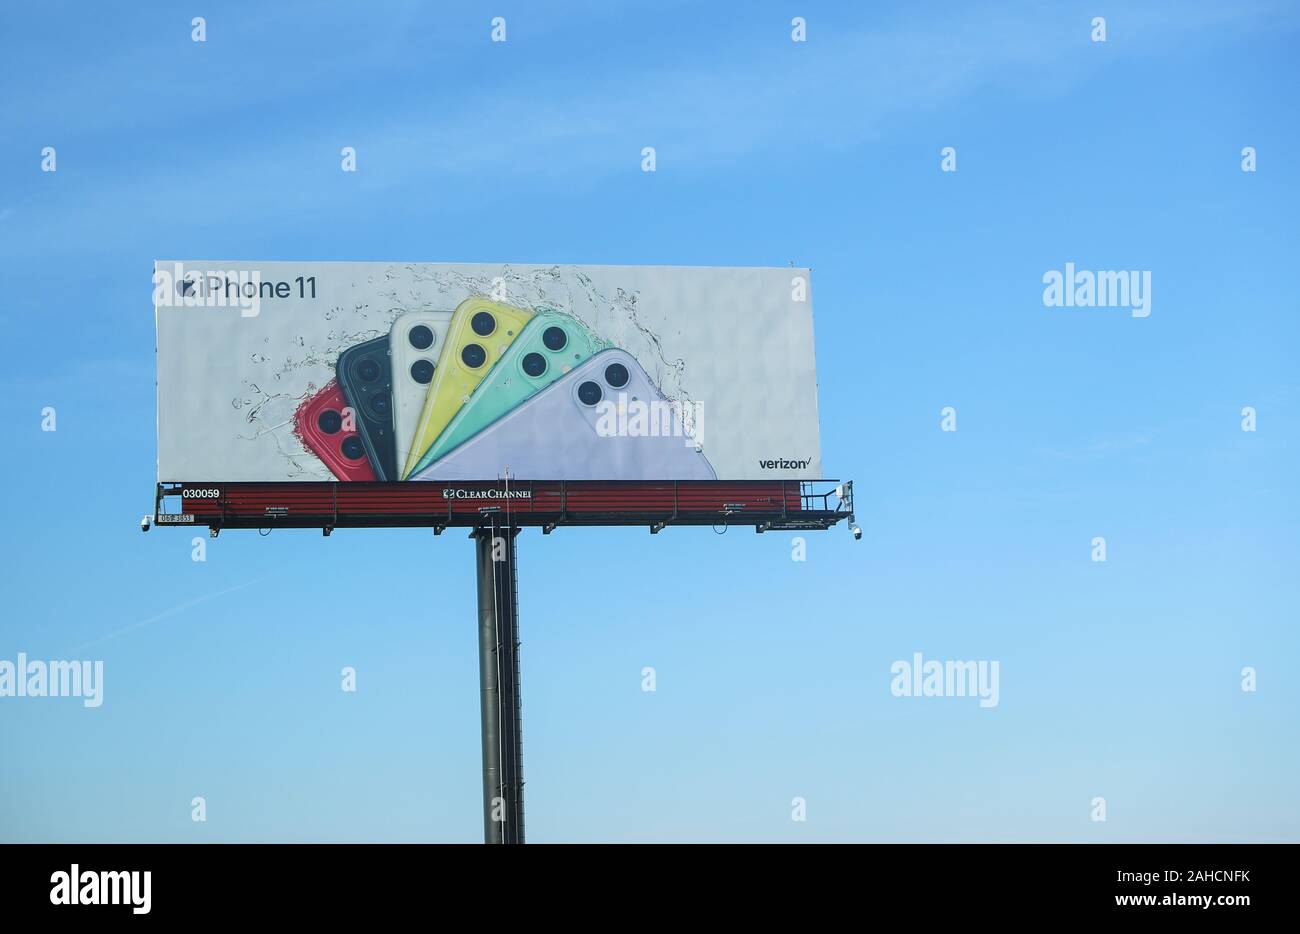 New Jersey December 26, 2019: A billboard advertising the iPhone 11 pro which on the highway - Image Stock Photo